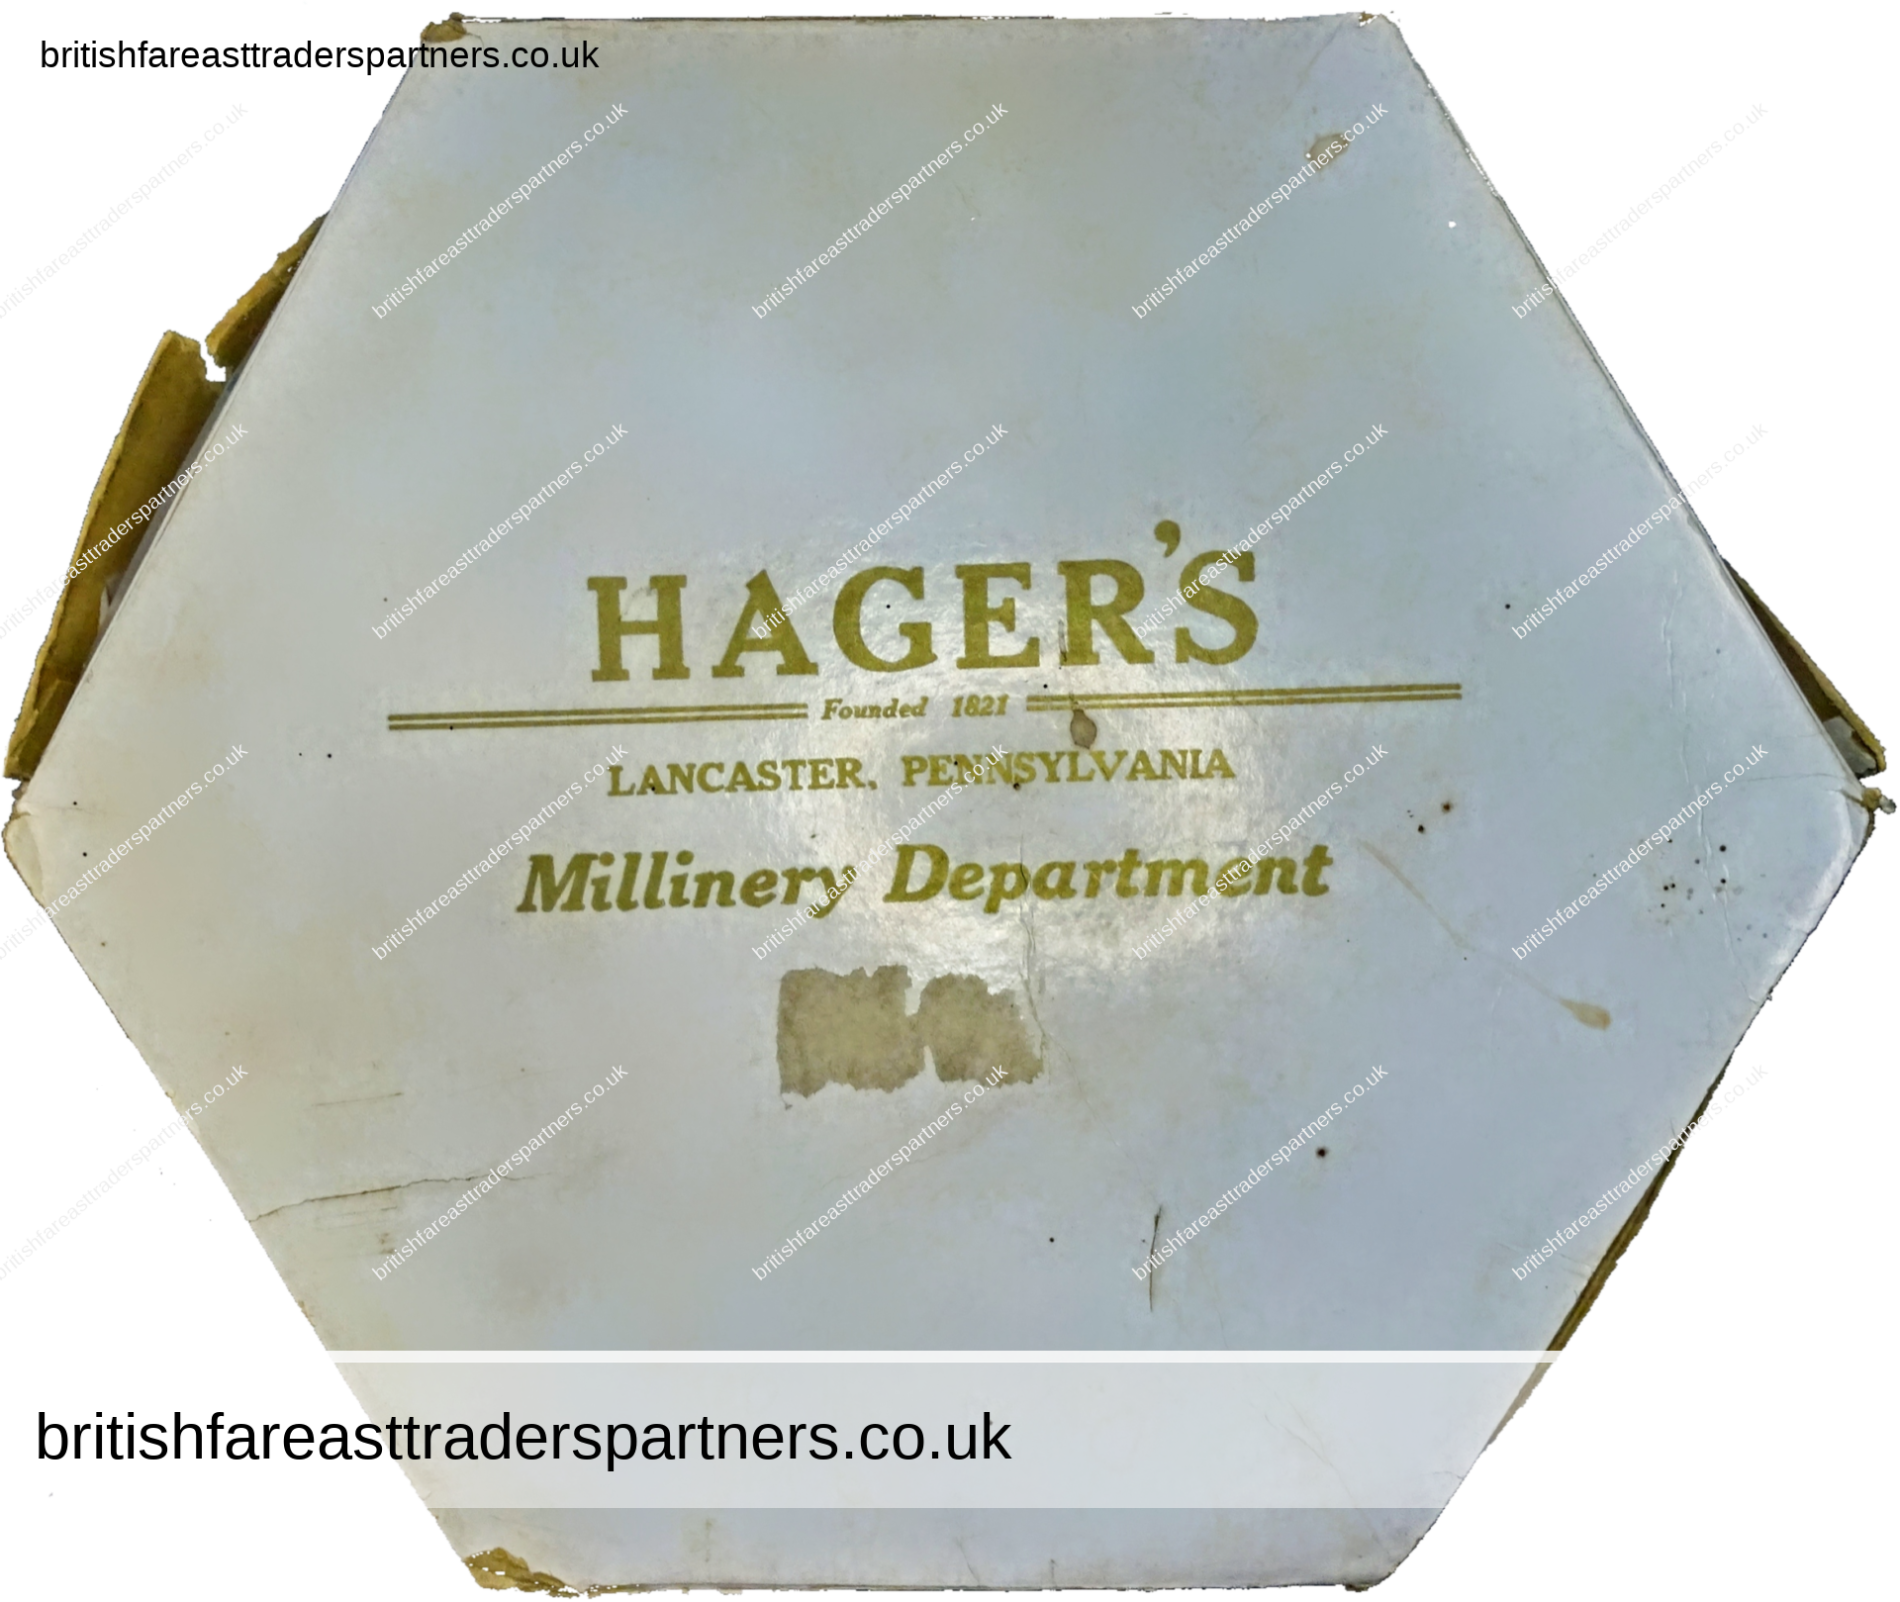 RARE VINTAGE / ANTIQUE HAGER’S DEPARTMENT STORE OLDEST DEPARTMENT STORE IN AMERICA Founded 1821 MILLINERY DEPARTMENT Lancaster, Pennsylvania USA  ADVERTISING COLLECTABLES STORAGE | ACCESORIES  HAT BOX HISTORY | NOSTALGIA | FASHION